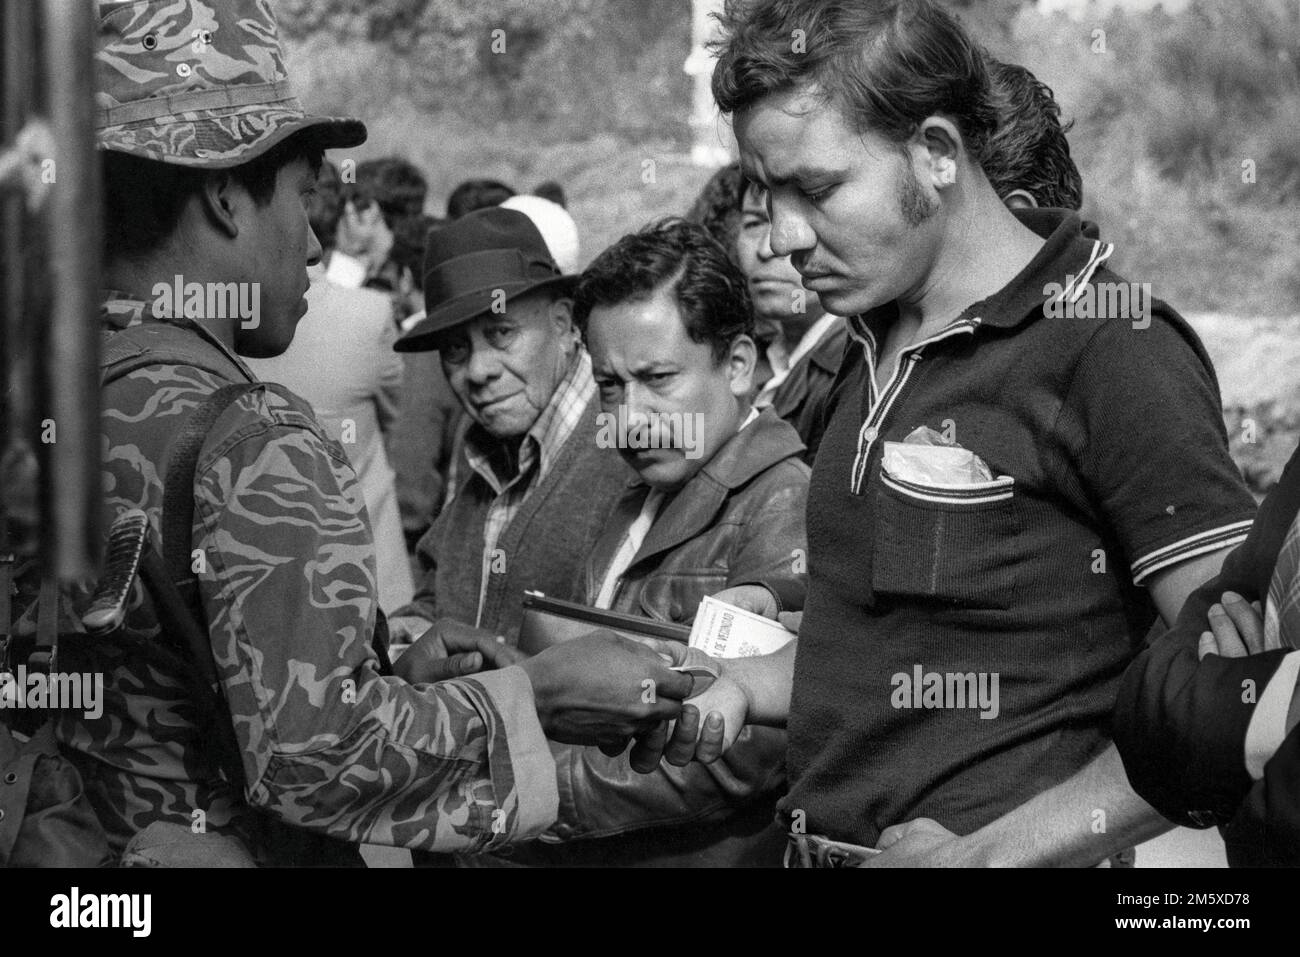 The Guatemalan Army conducting an ID check of bus passengers on the Pan  American Highway as part of a counterinsurgency campaign against leftist guerrilla groups., Guatemala, March 1982. Stock Photo